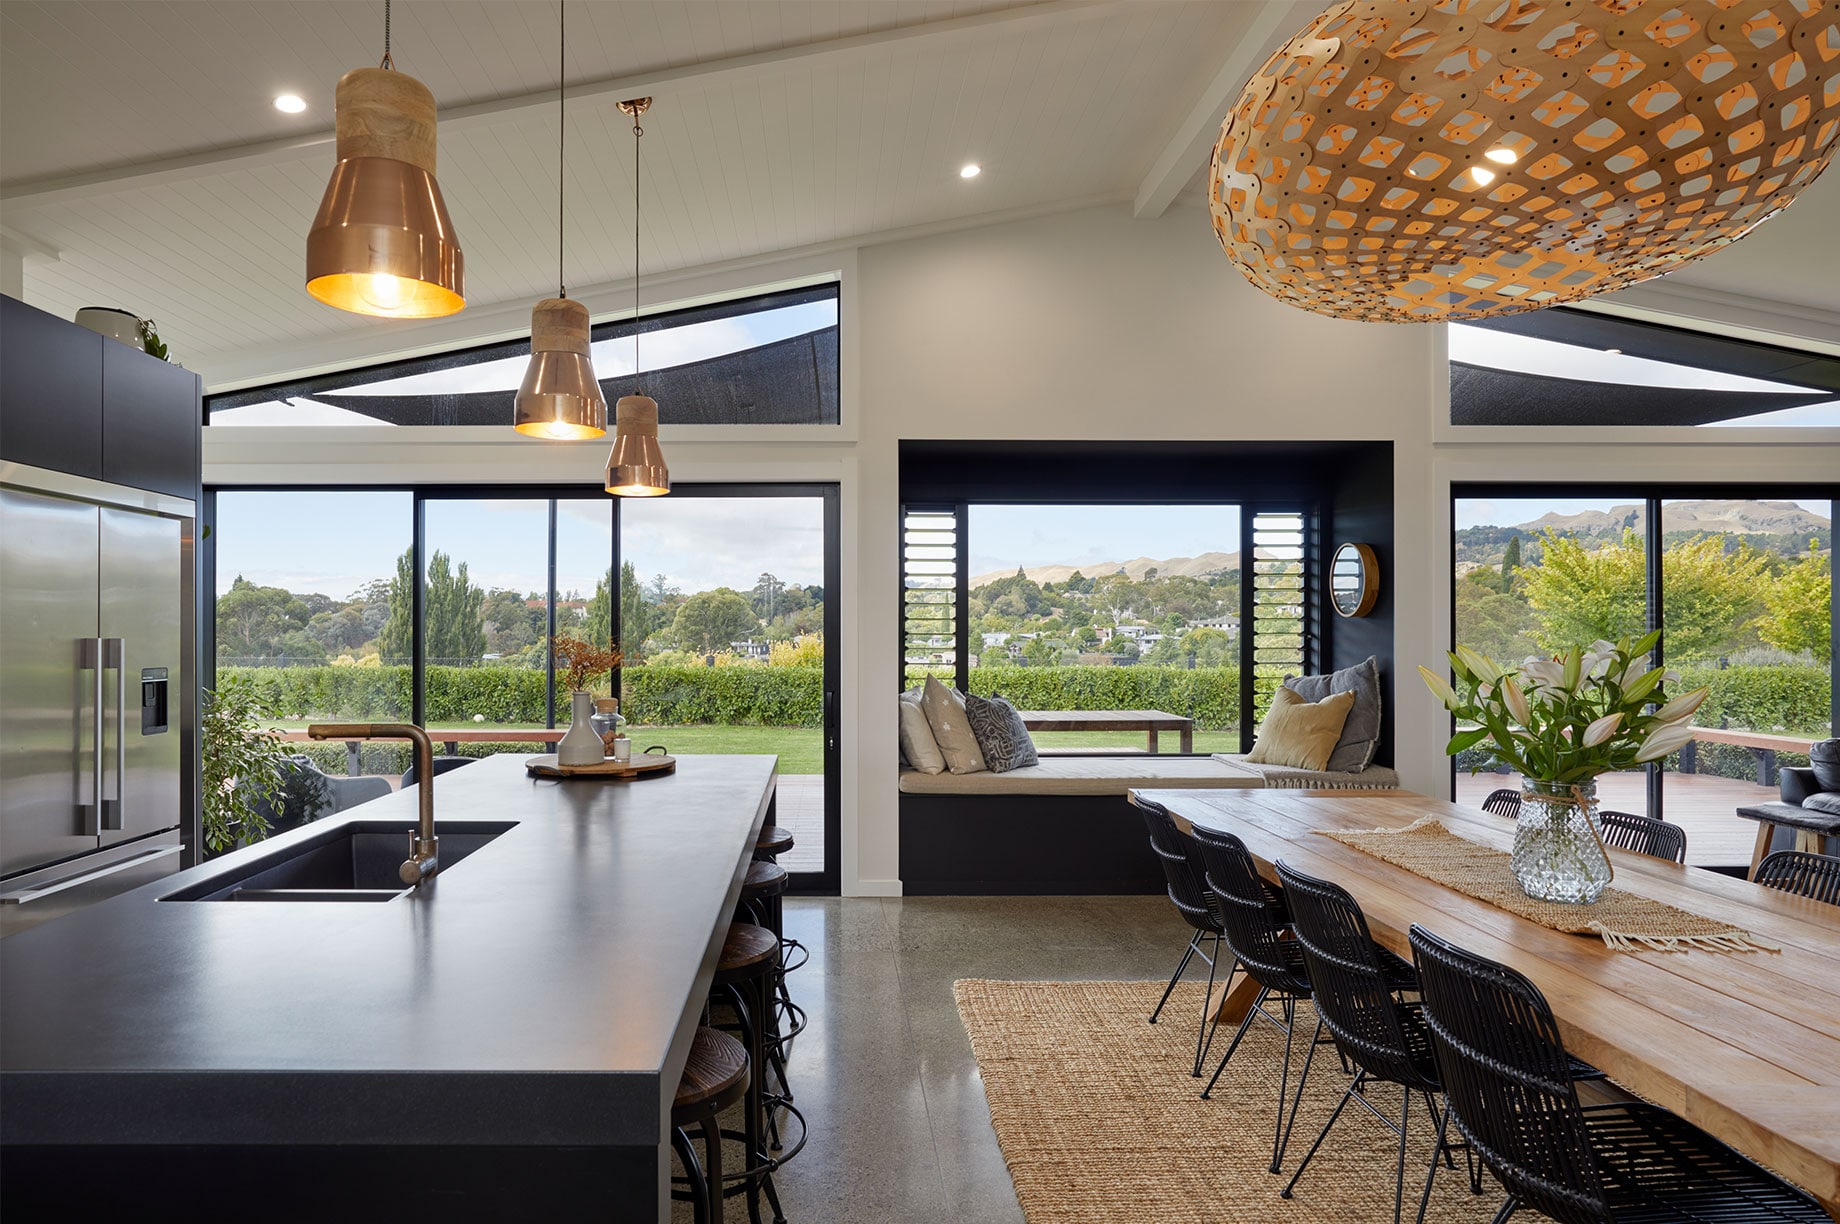 Kitchen and dining area overlooking hills